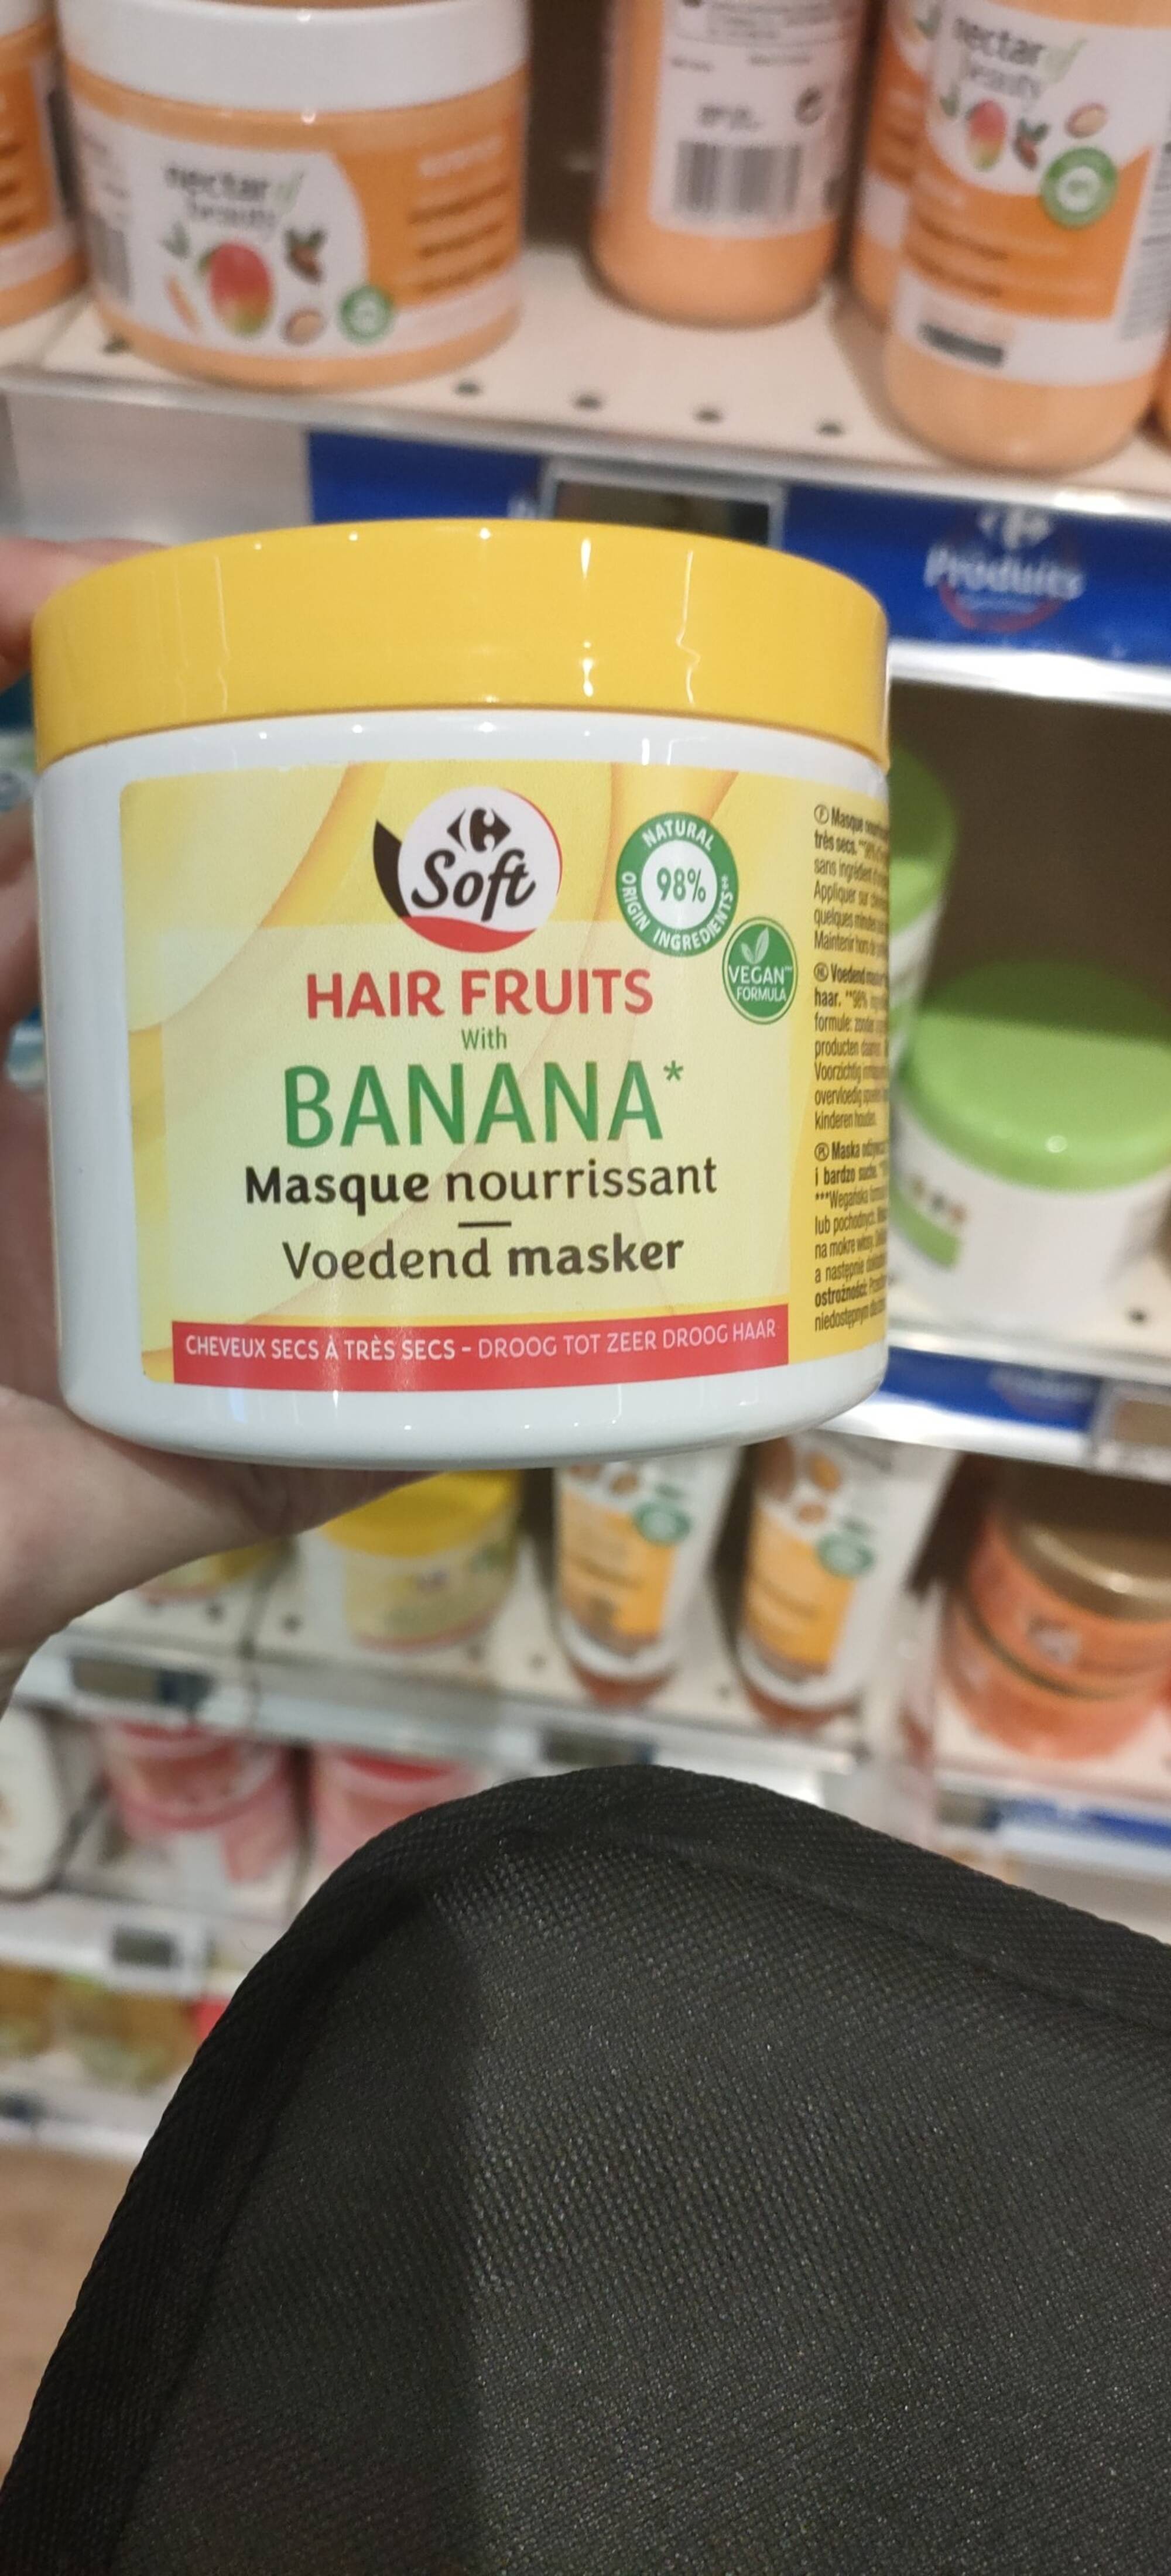 CARREFOUR - Soft hair fruits with banana - Masque nourissant